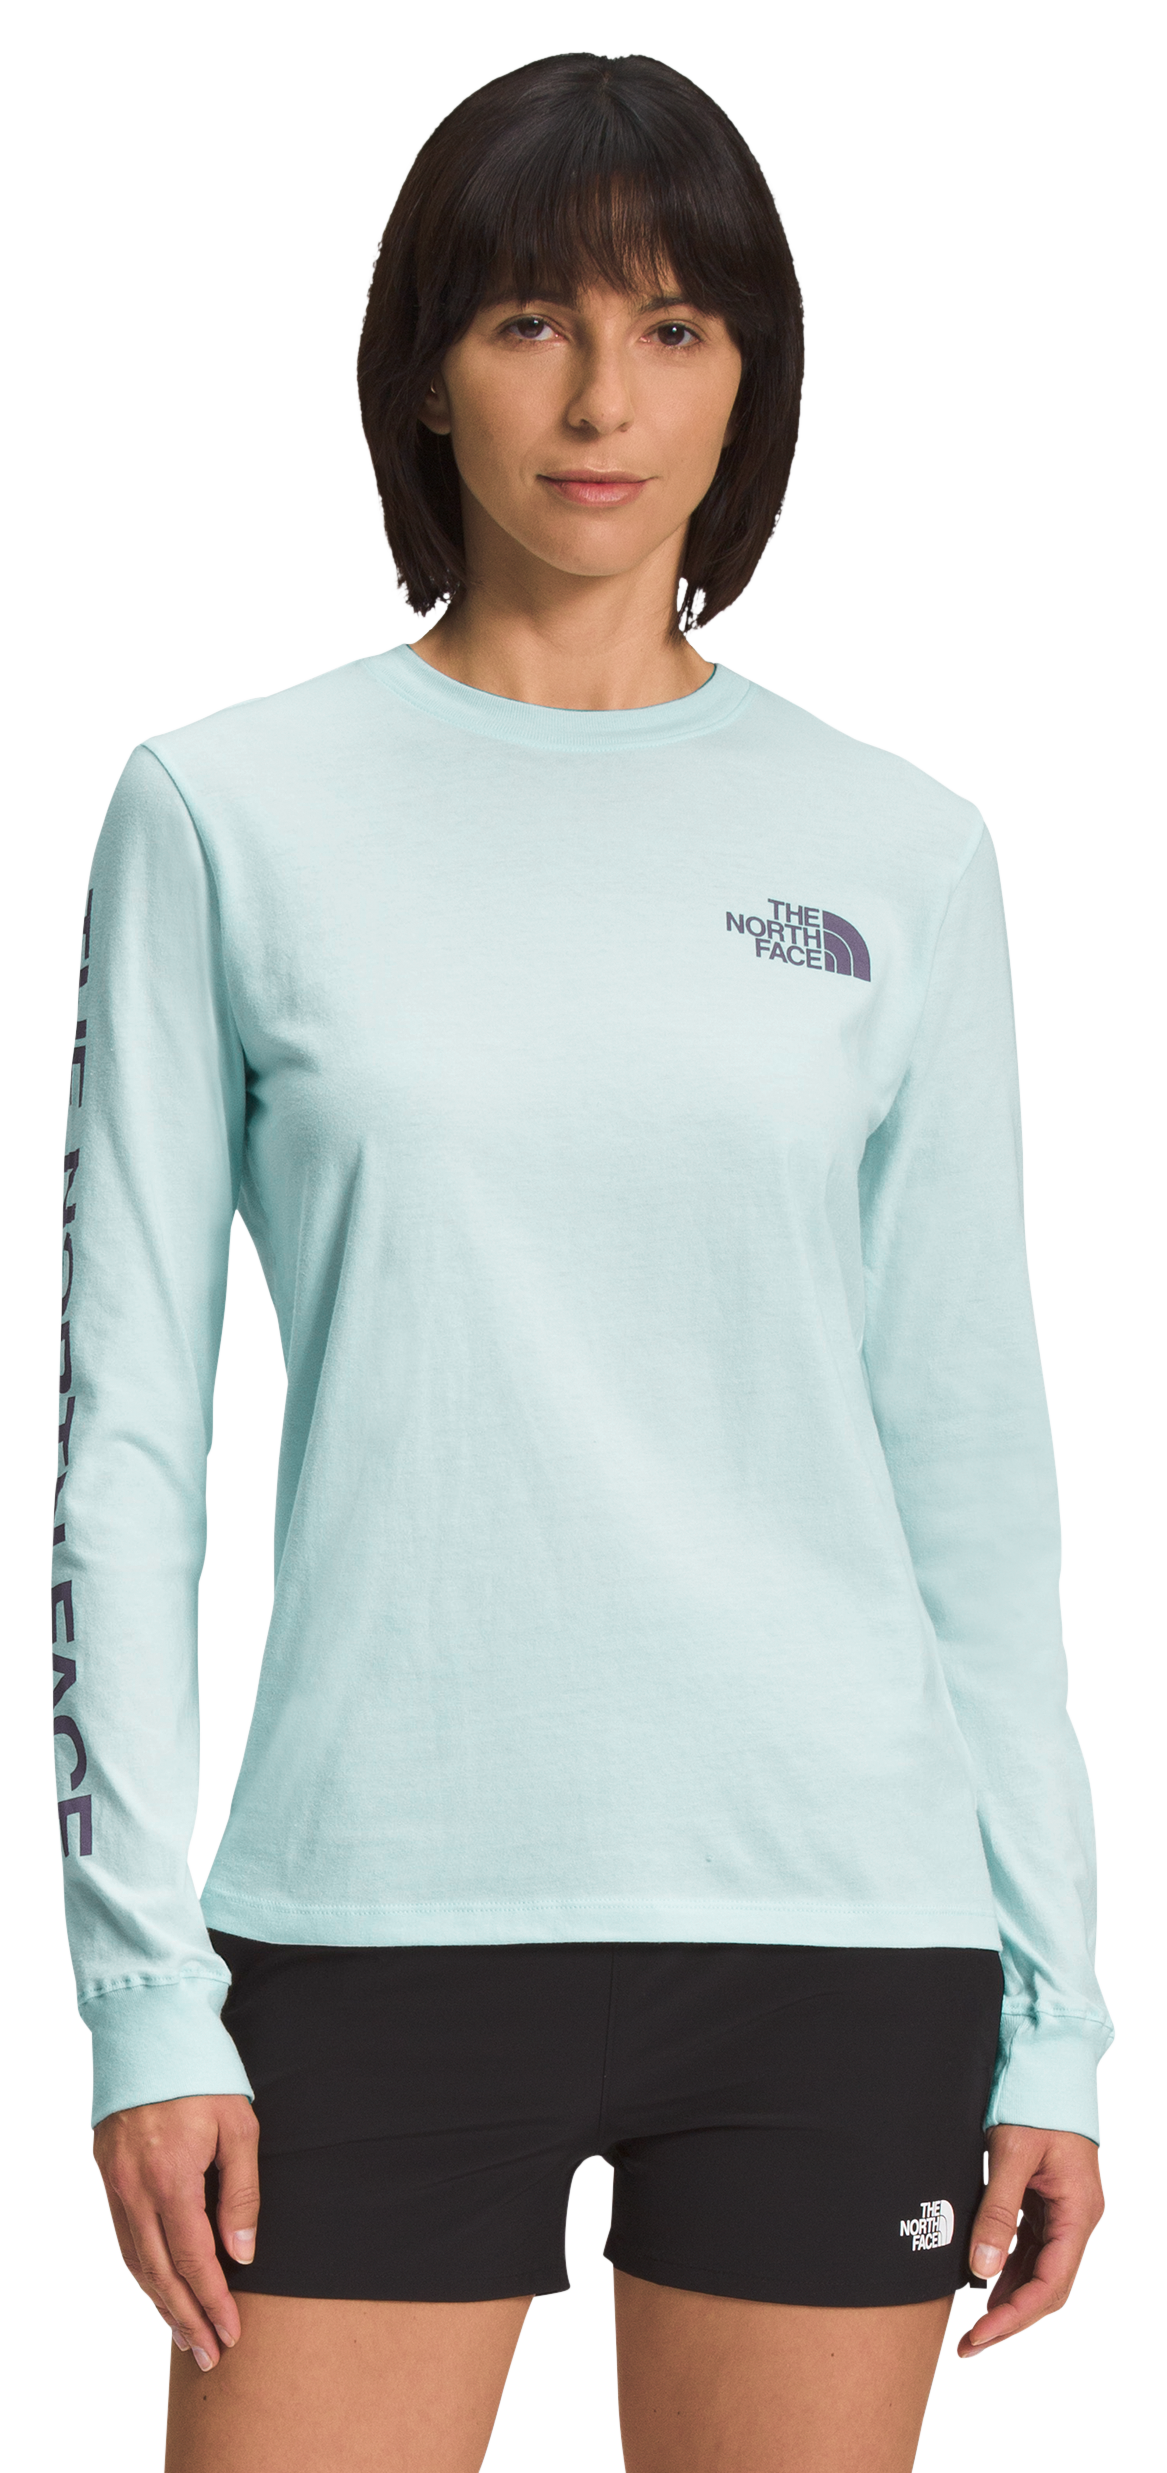 The North Face Hit Graphic Long-Sleeve T-Shirt for Ladies - Skylight Blue/Lunar Slate - XXL